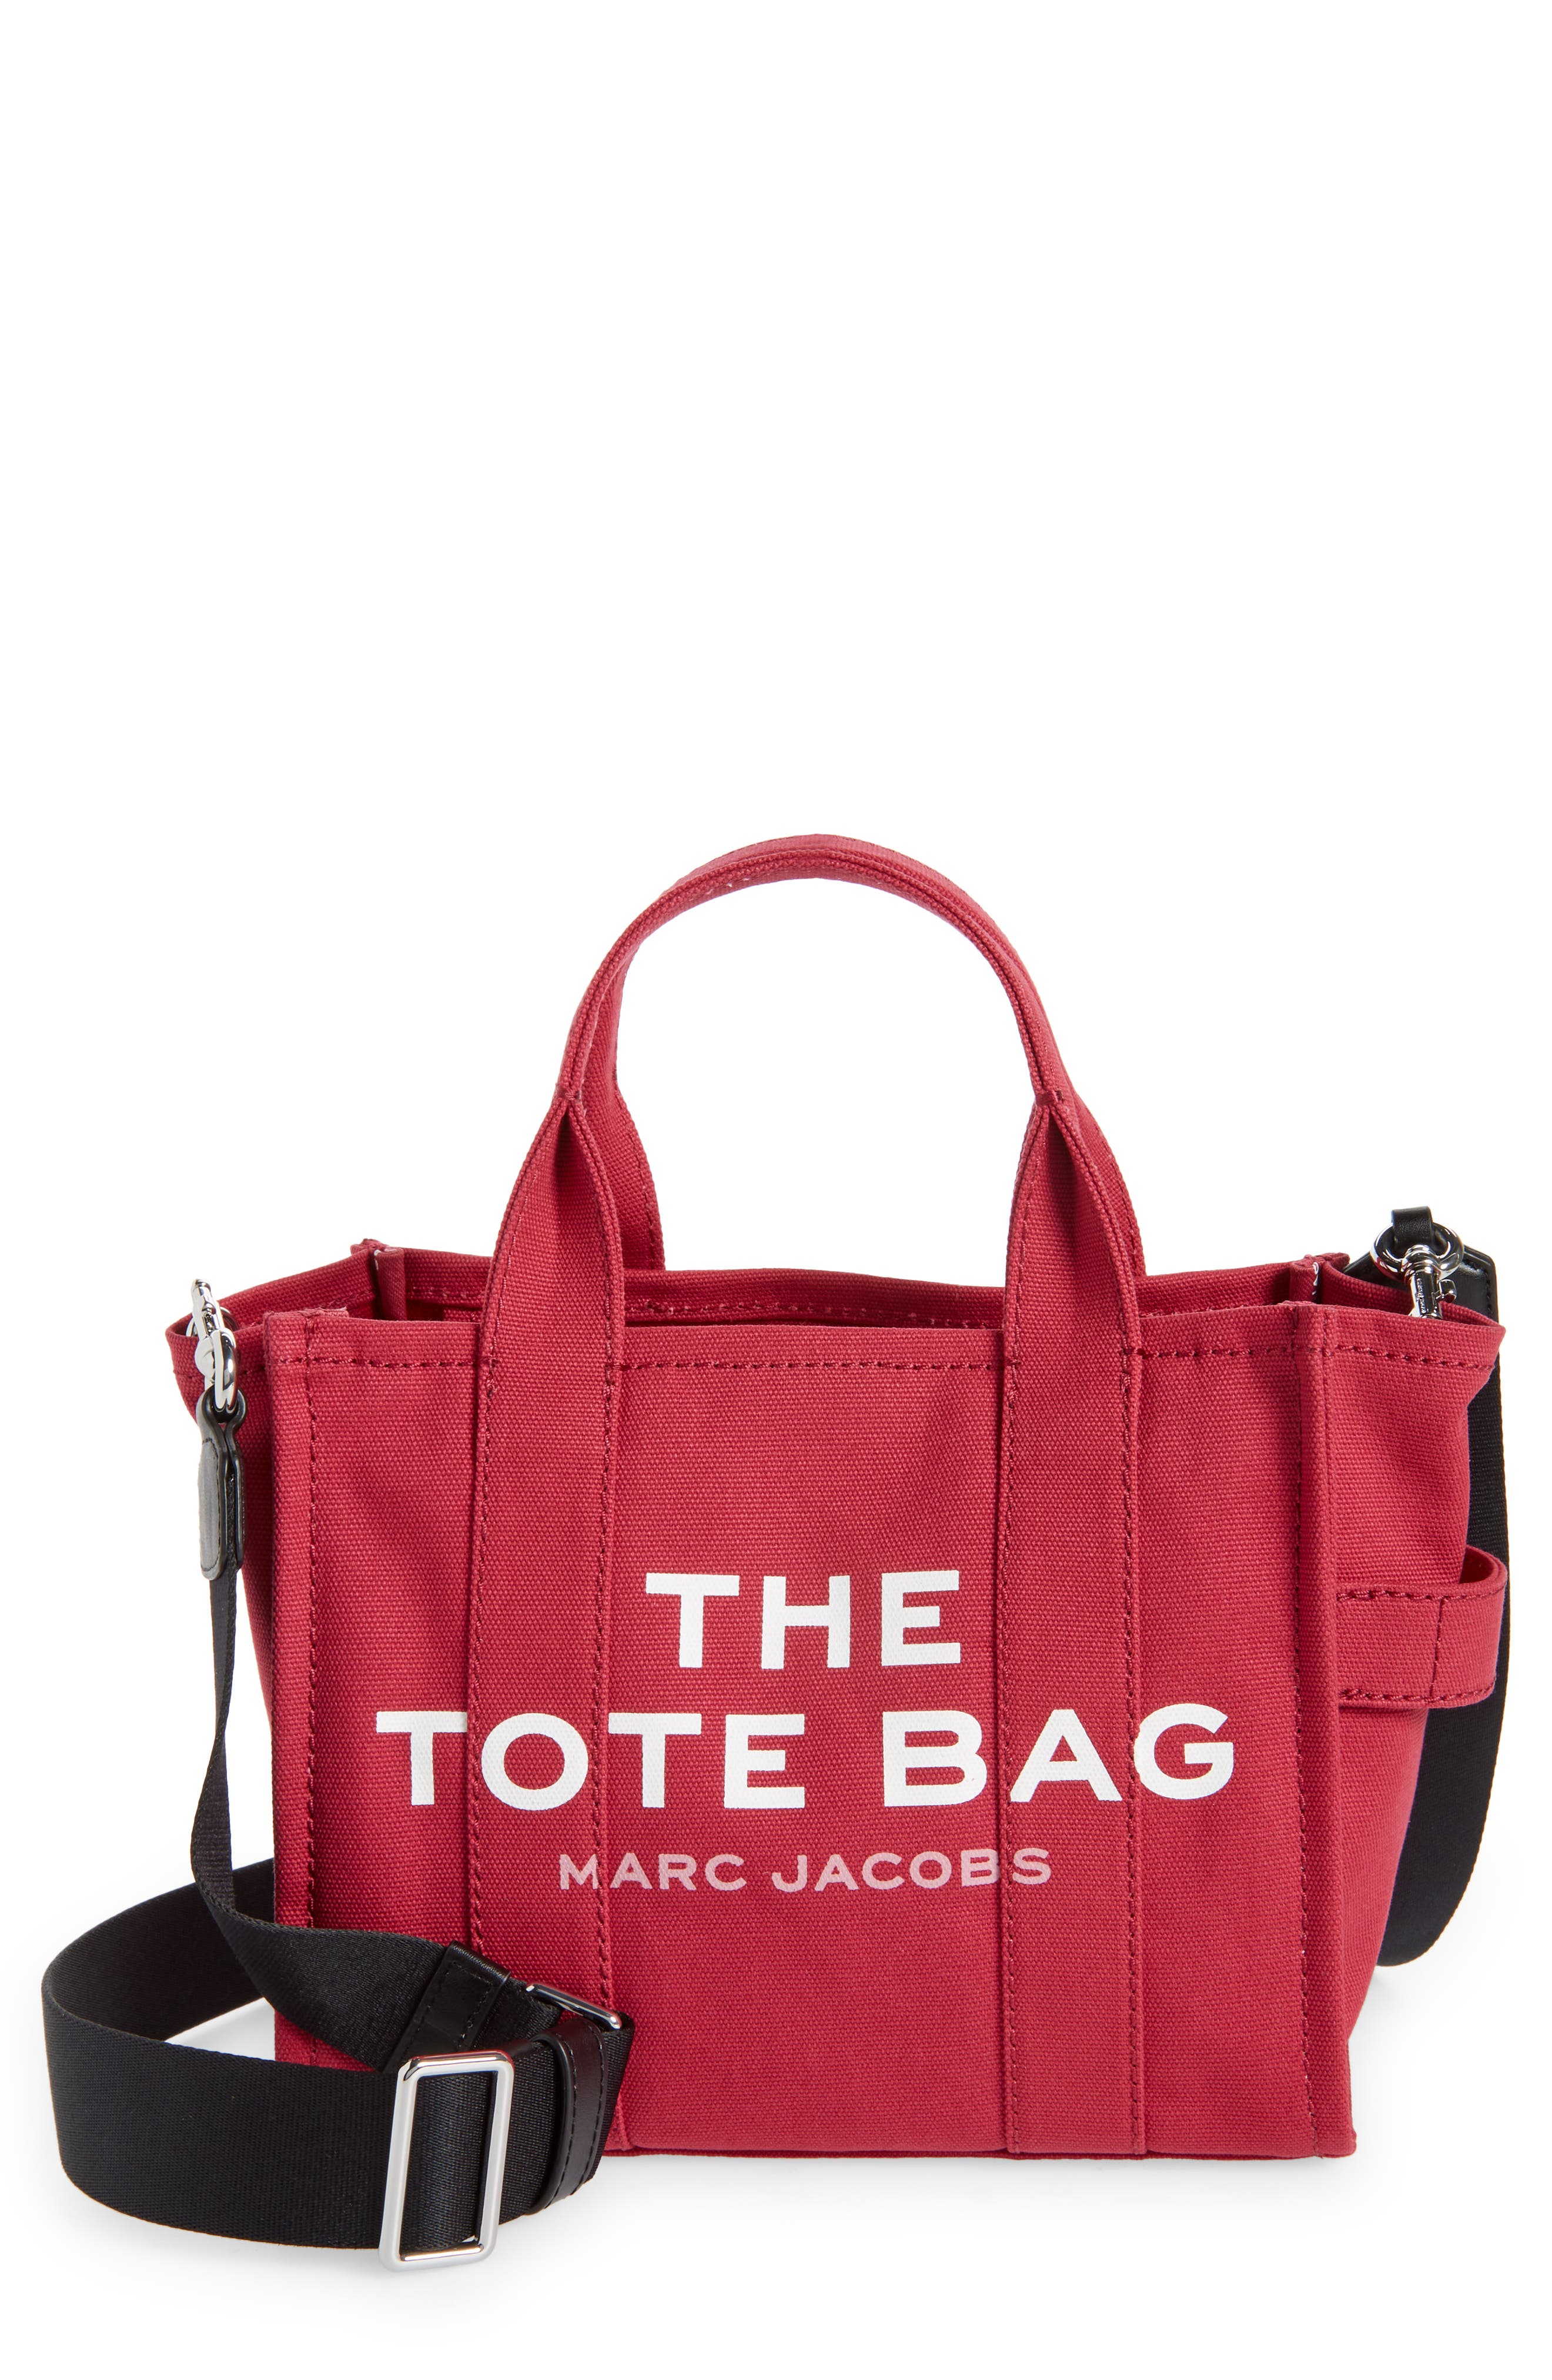 marc jacobs tote bag red